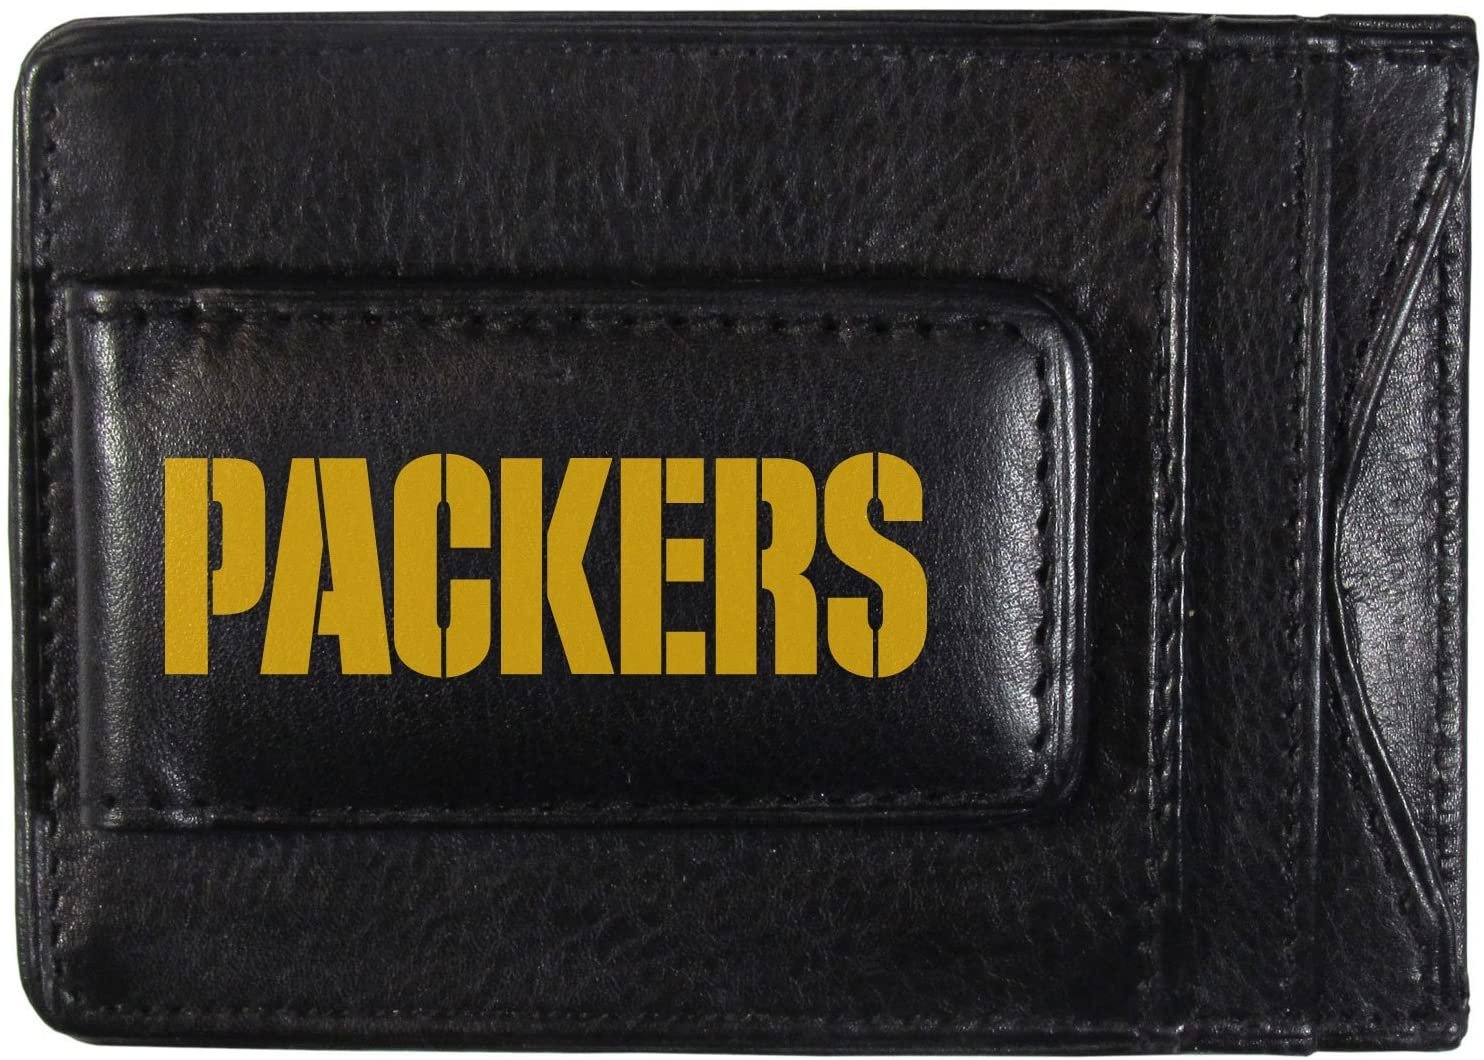 Green Bay Packers Black Leather Wallet, Front Pocket Magnetic Money Clip, Printed Logo